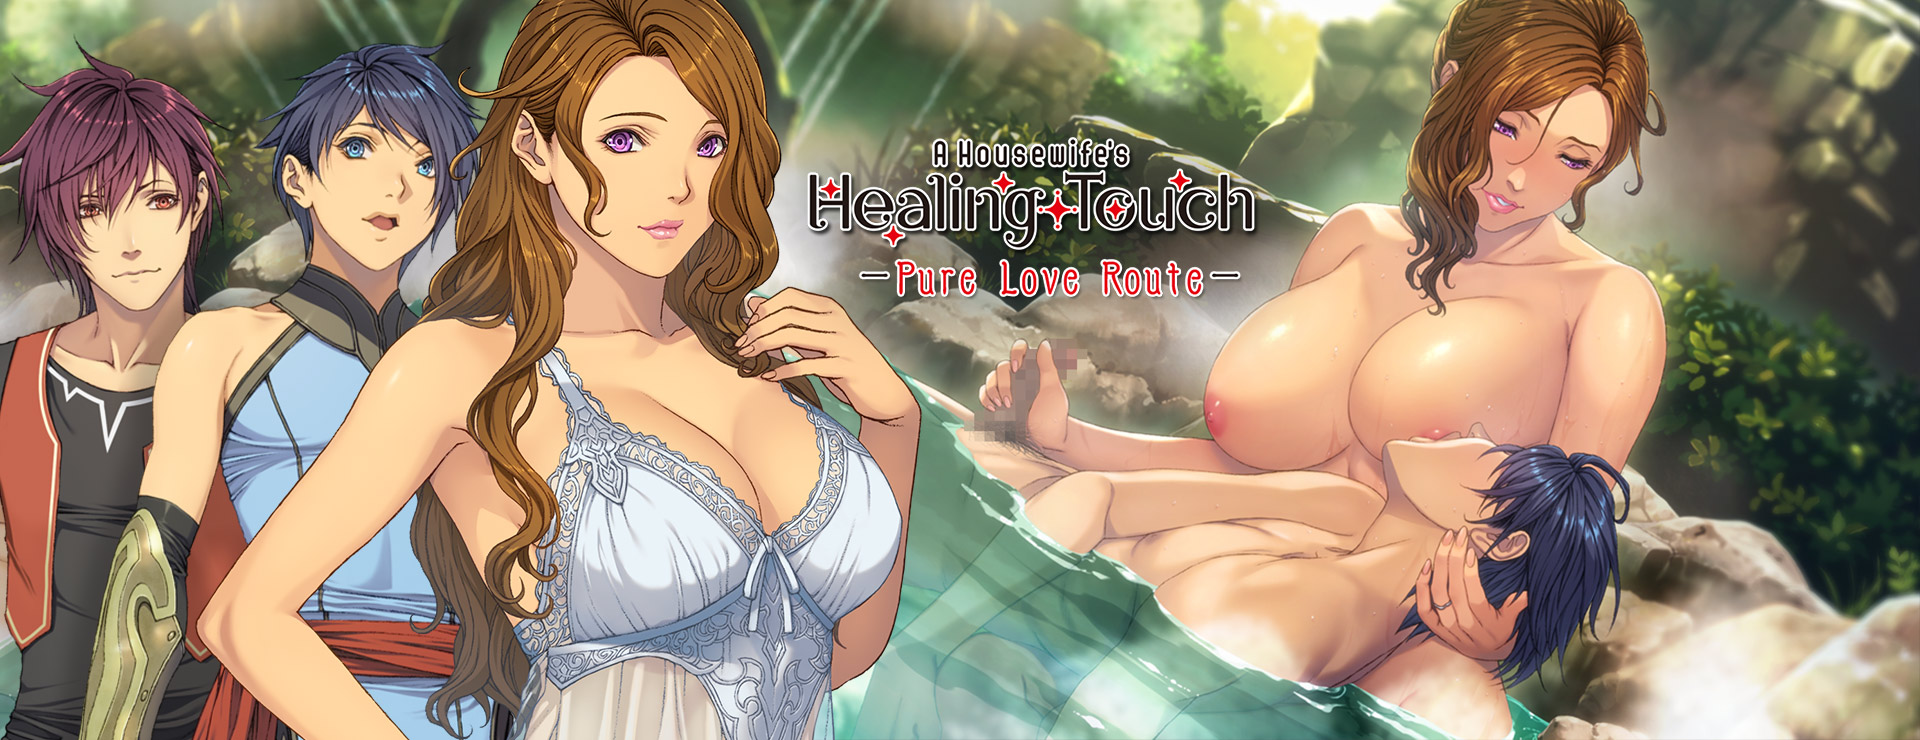 A Housewife's Healing Touch (Pure Love Route) - Action Adventure Spiel